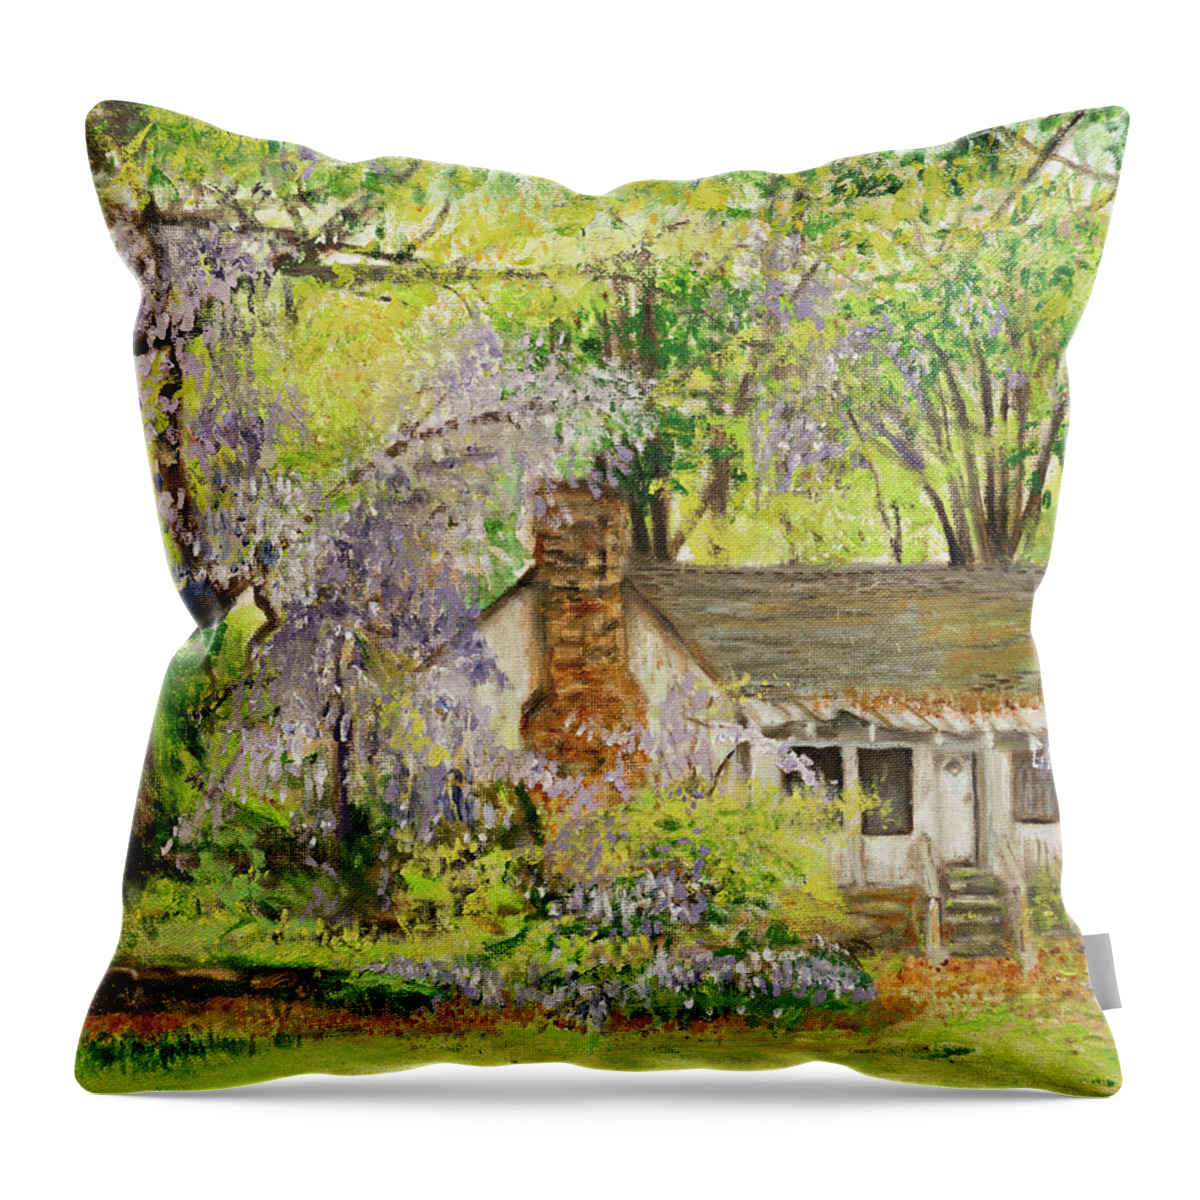 Wisteria Throw Pillow featuring the painting Wisteria House Two by Kathy Knopp